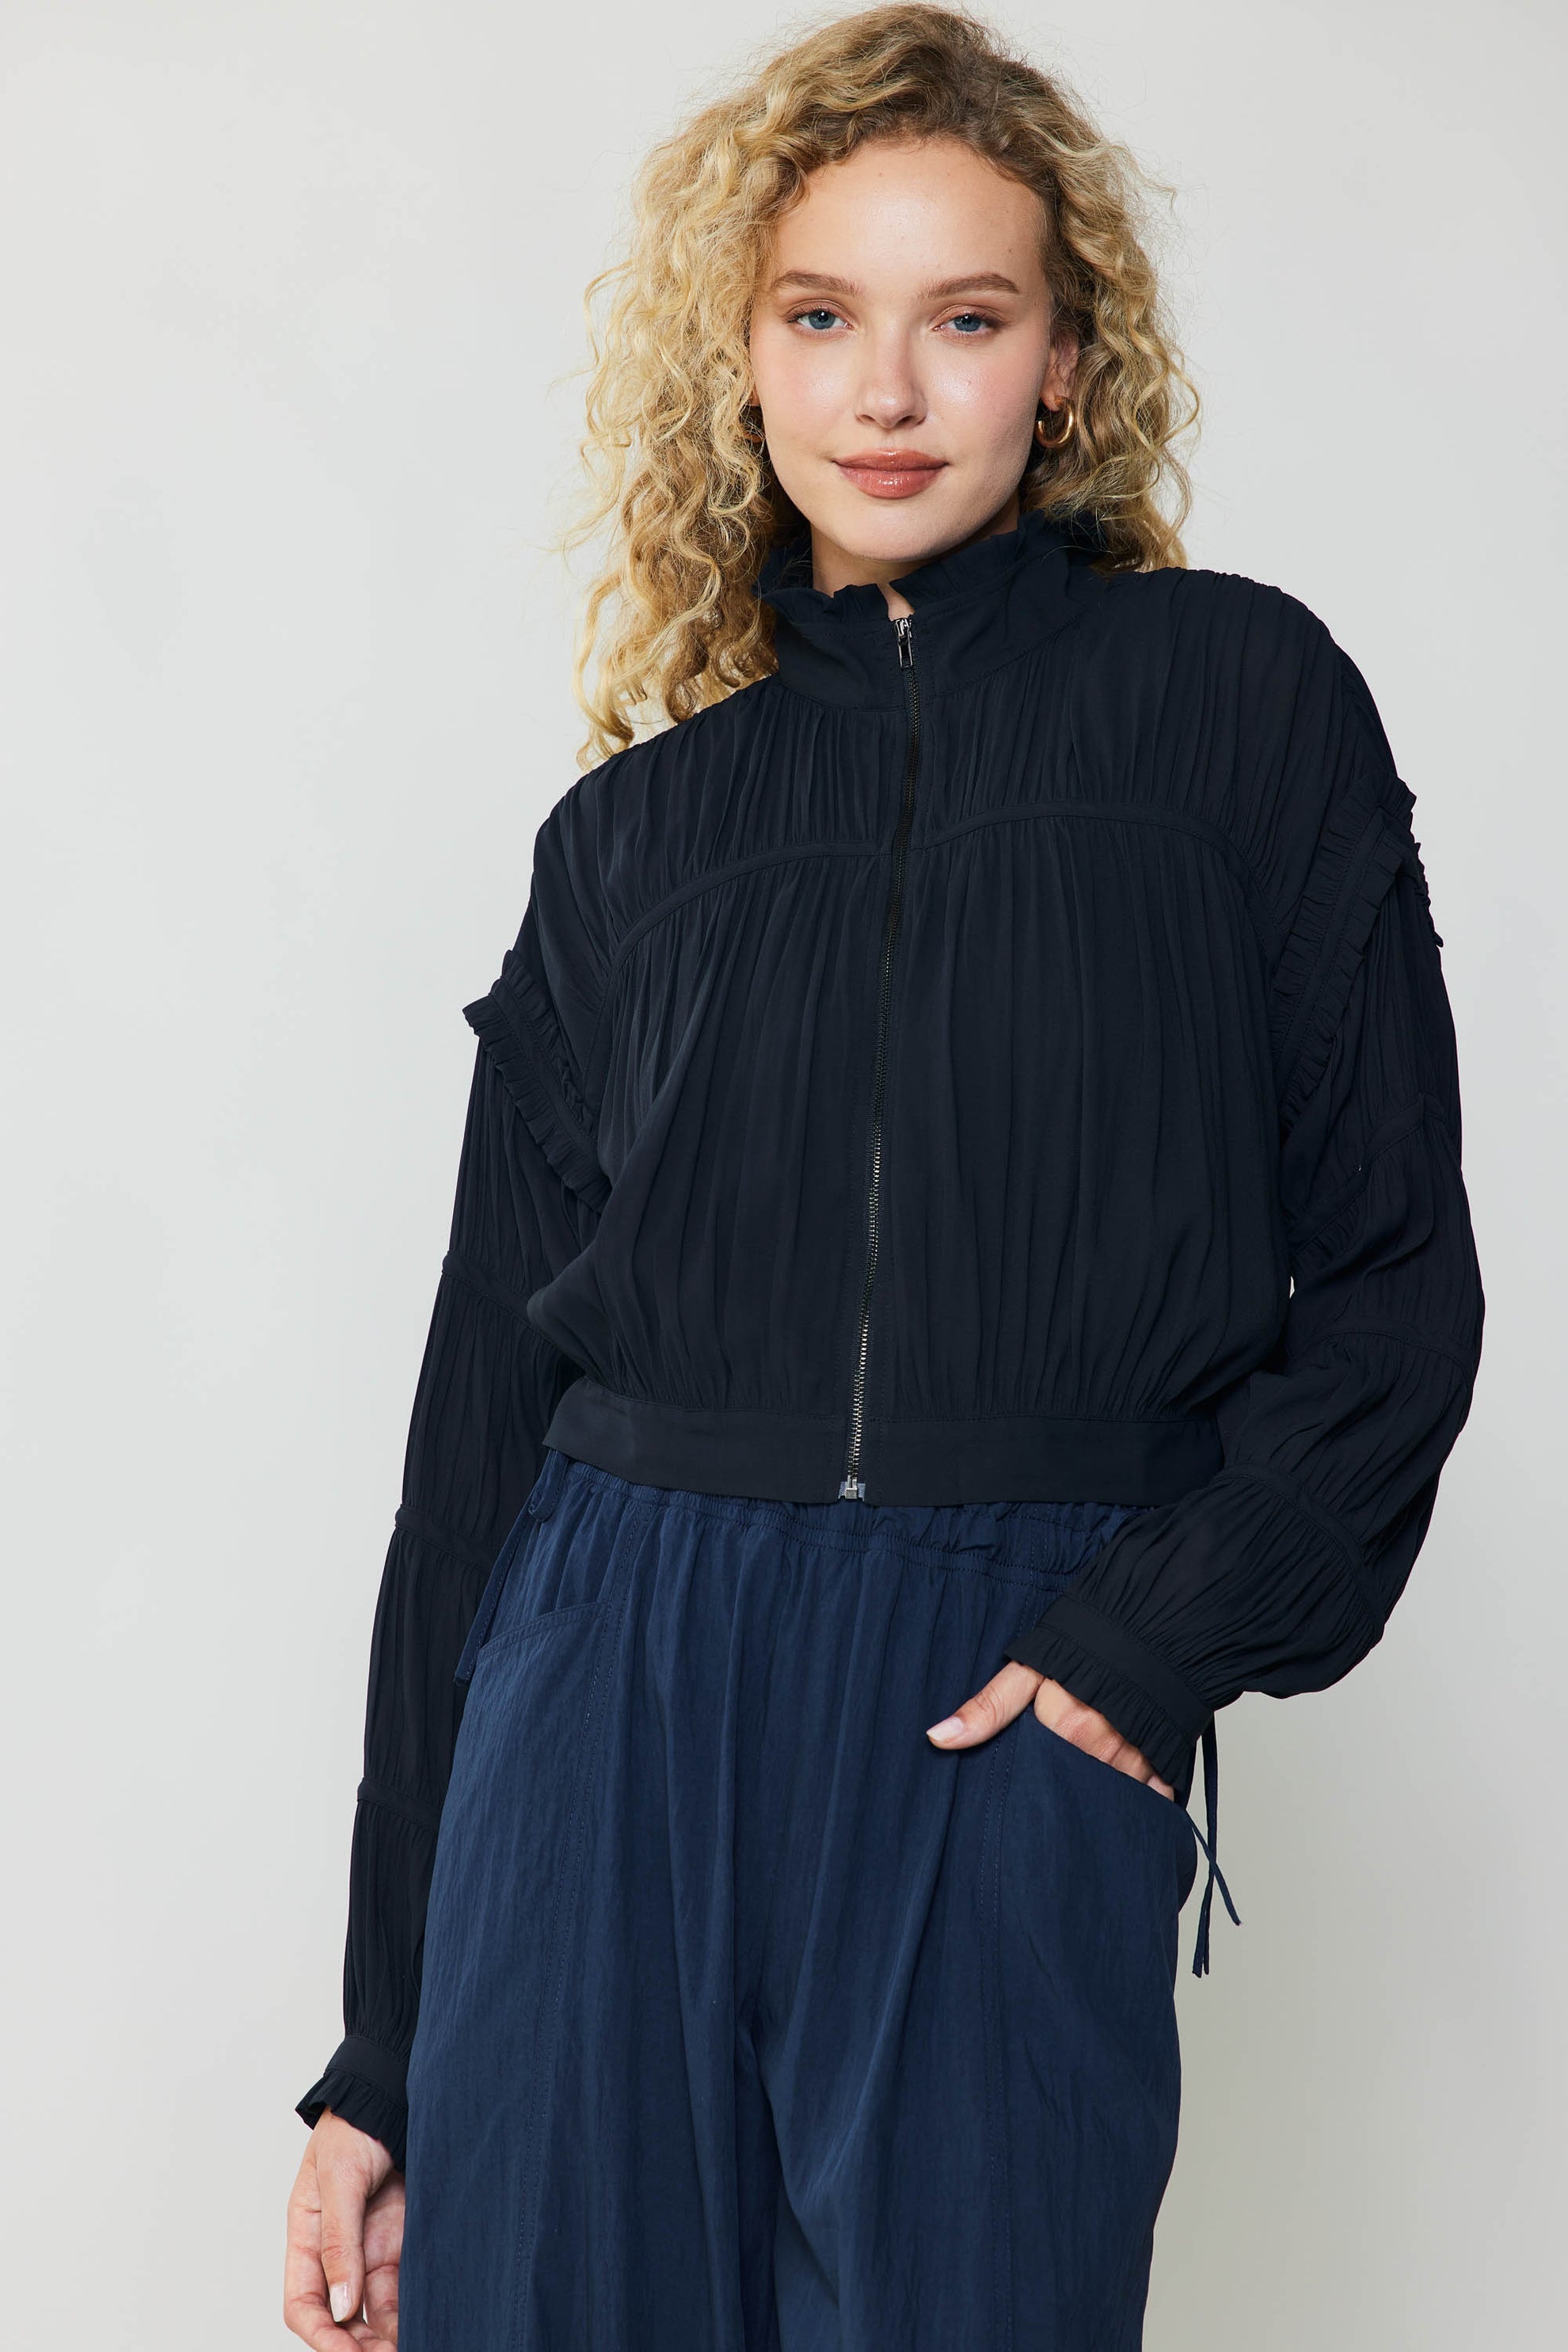 Shirred Sleeve Jacket by Current Air